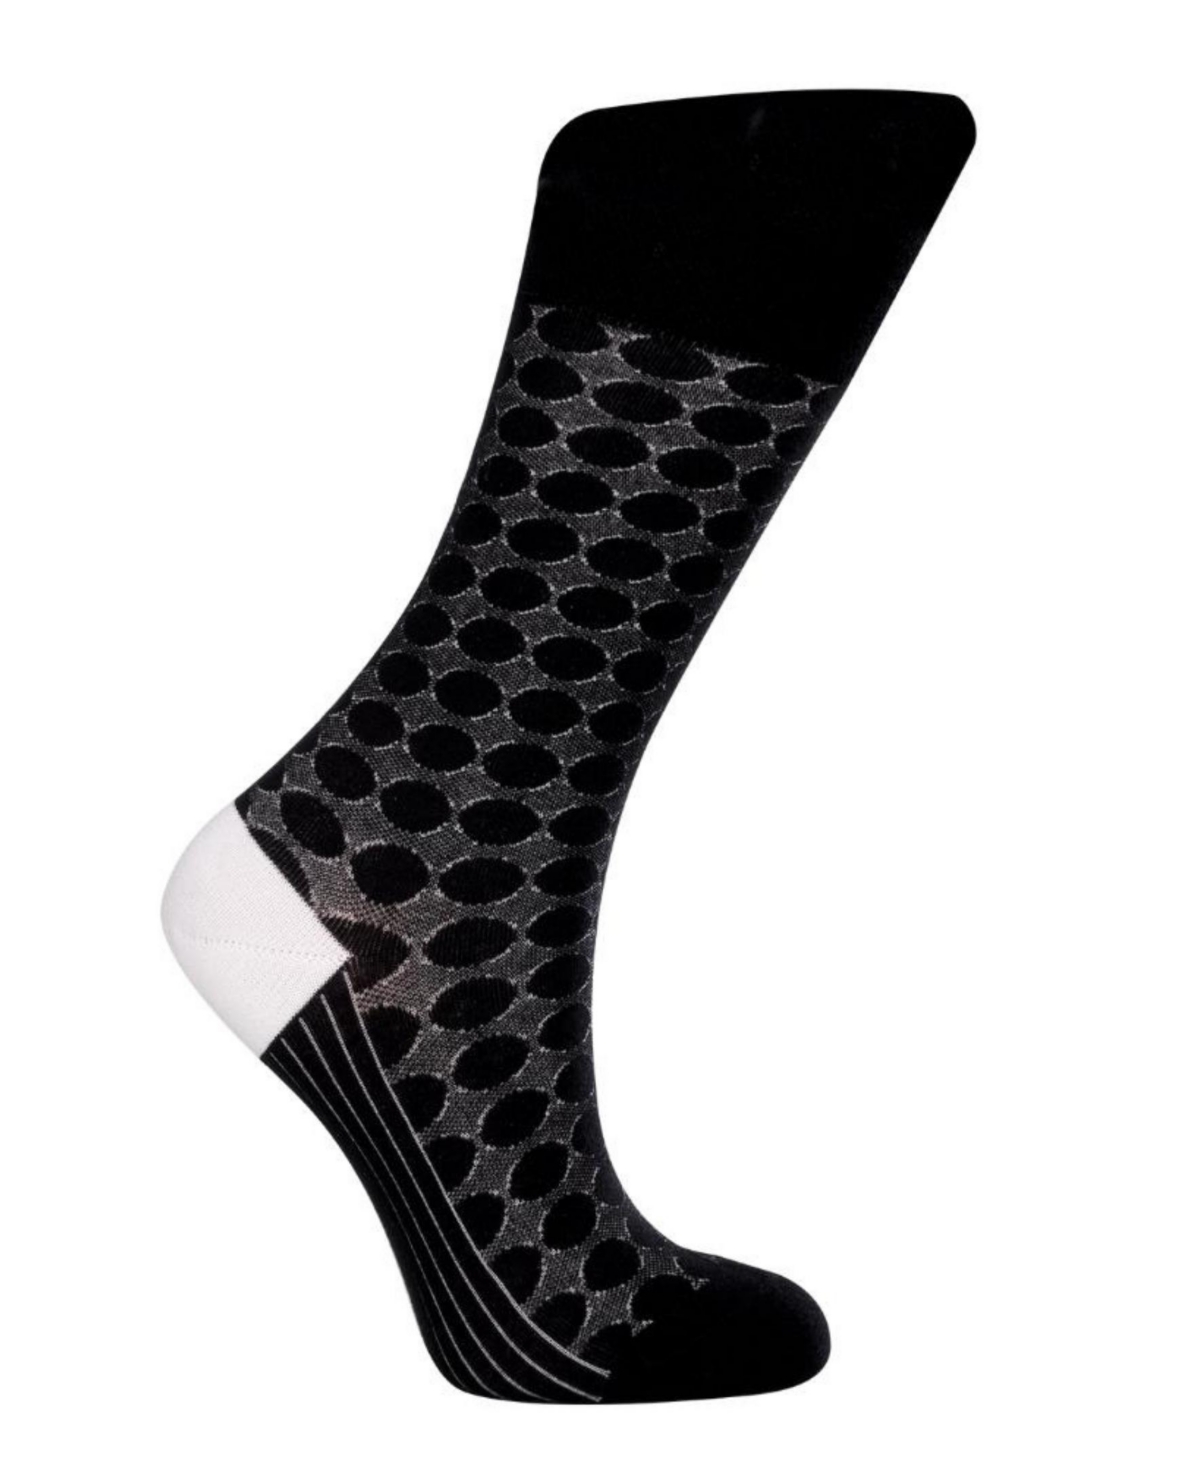 Love Sock Company Women's Circles W-Cotton Dress Socks with Seamless Toe Design, Pack of 1